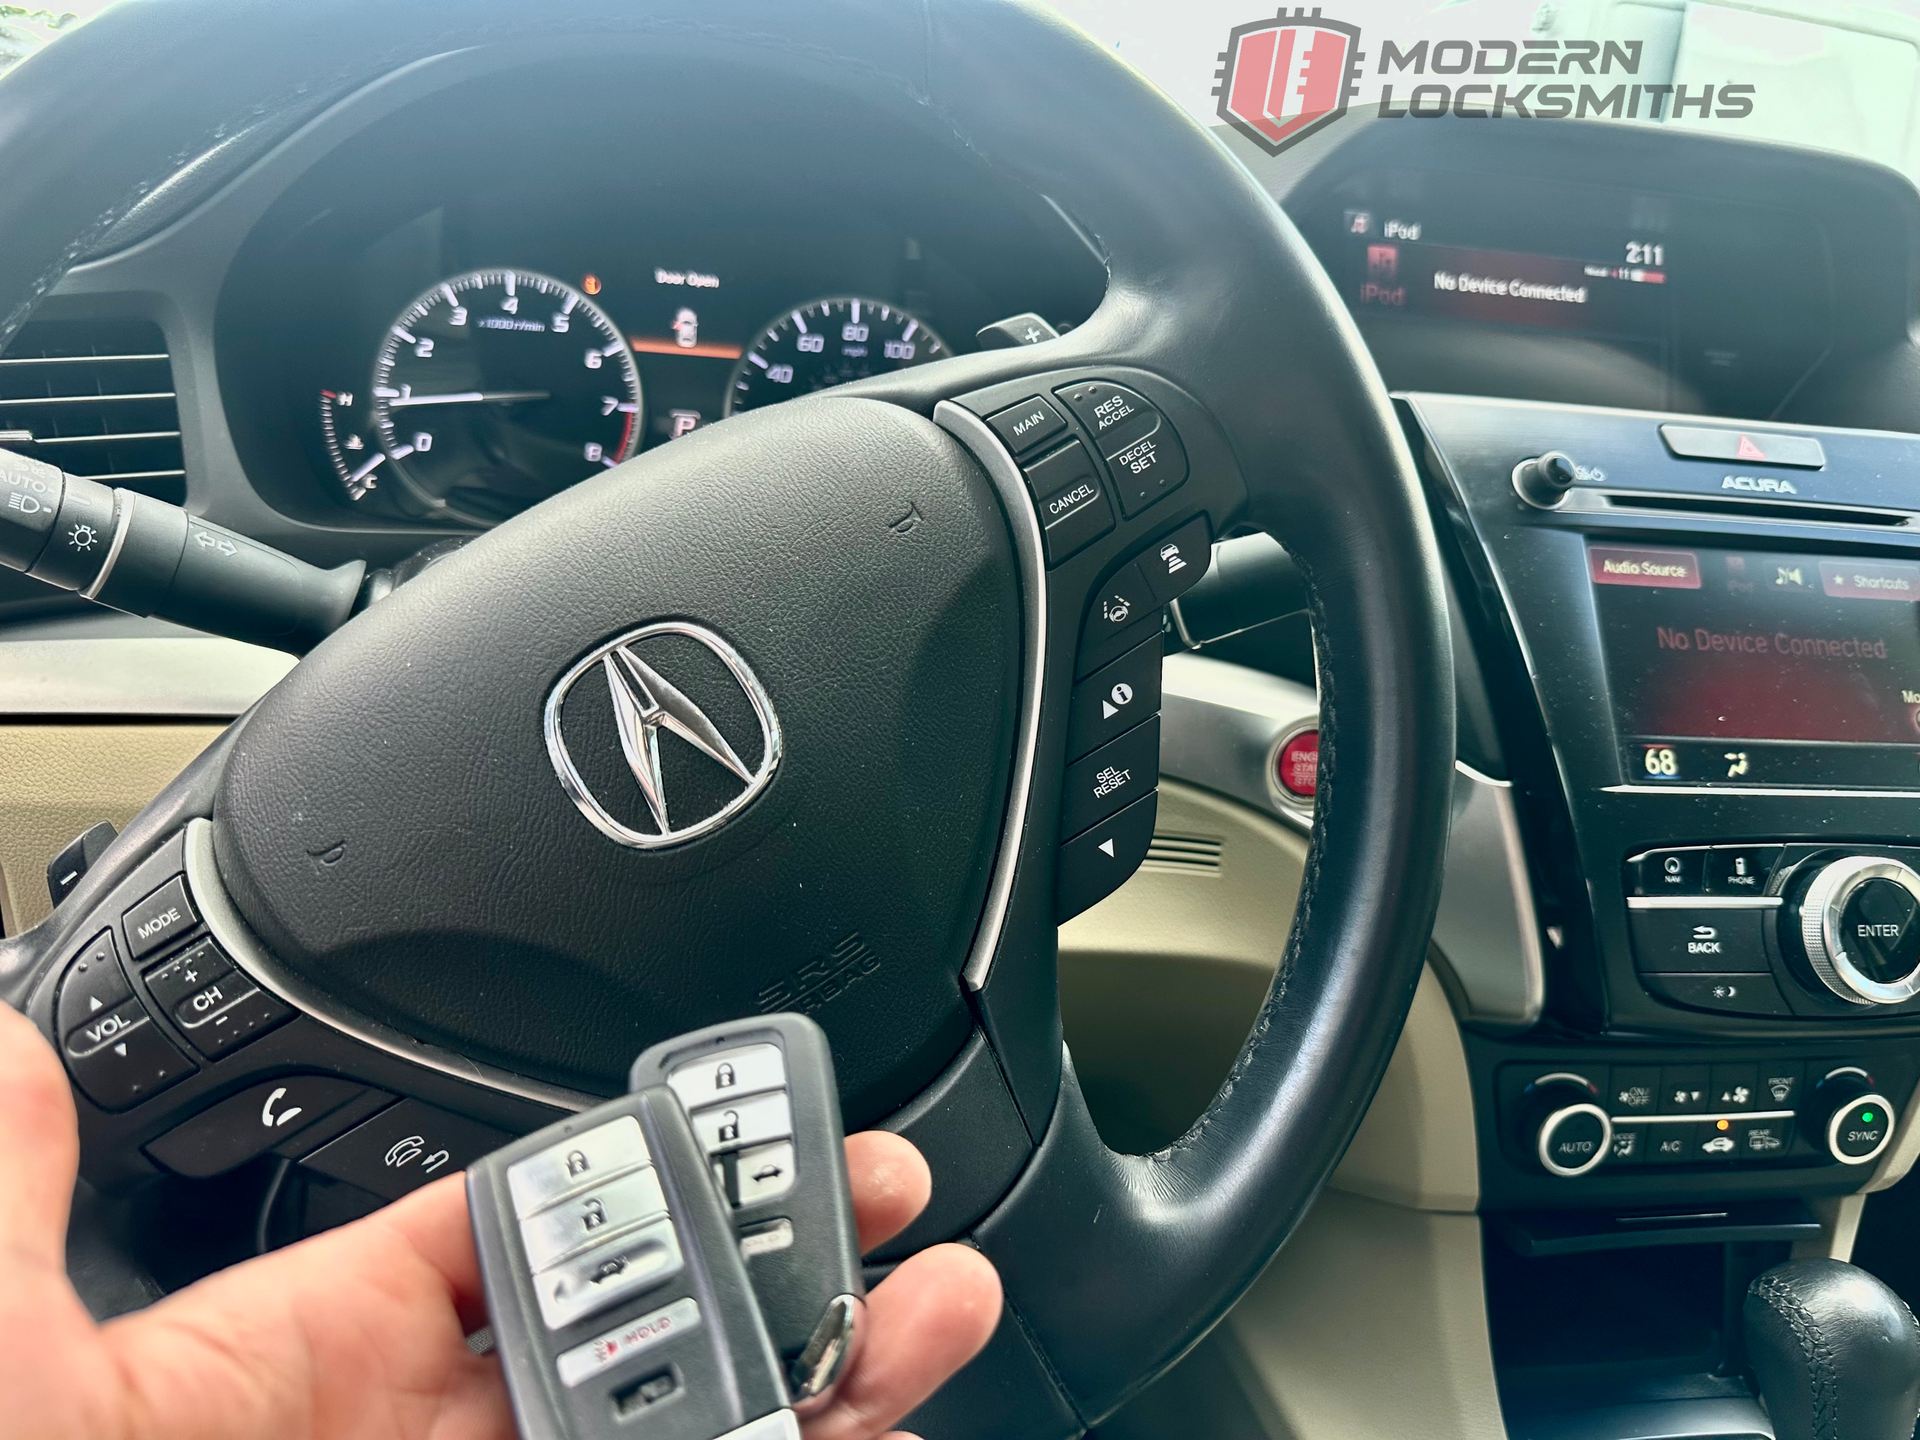 a hand holding an Acura remote key in front of a steering wheel